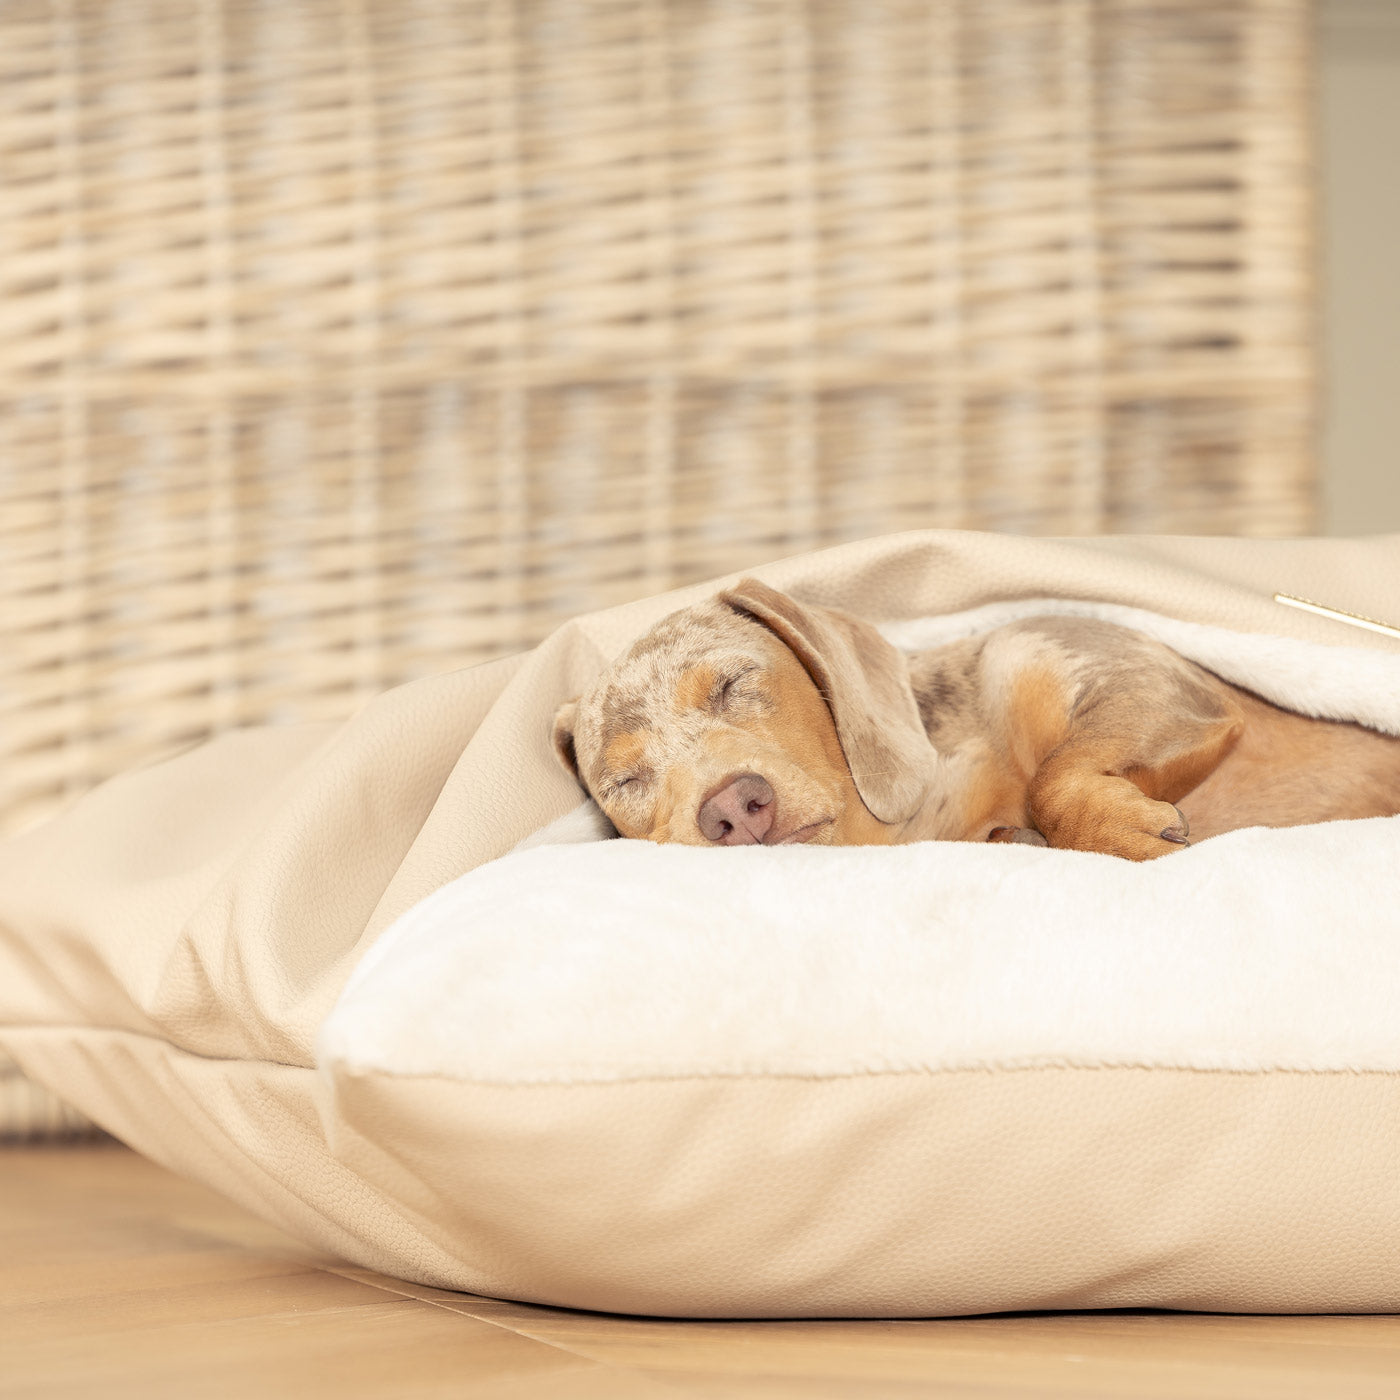 Discover The Perfect Burrow For Your Pet, Our Stunning Sleepy Burrow Dog Beds In Rhino Sand, Is The Perfect Bed Choice For Your Pet, Available Now at Lords & Labradors US